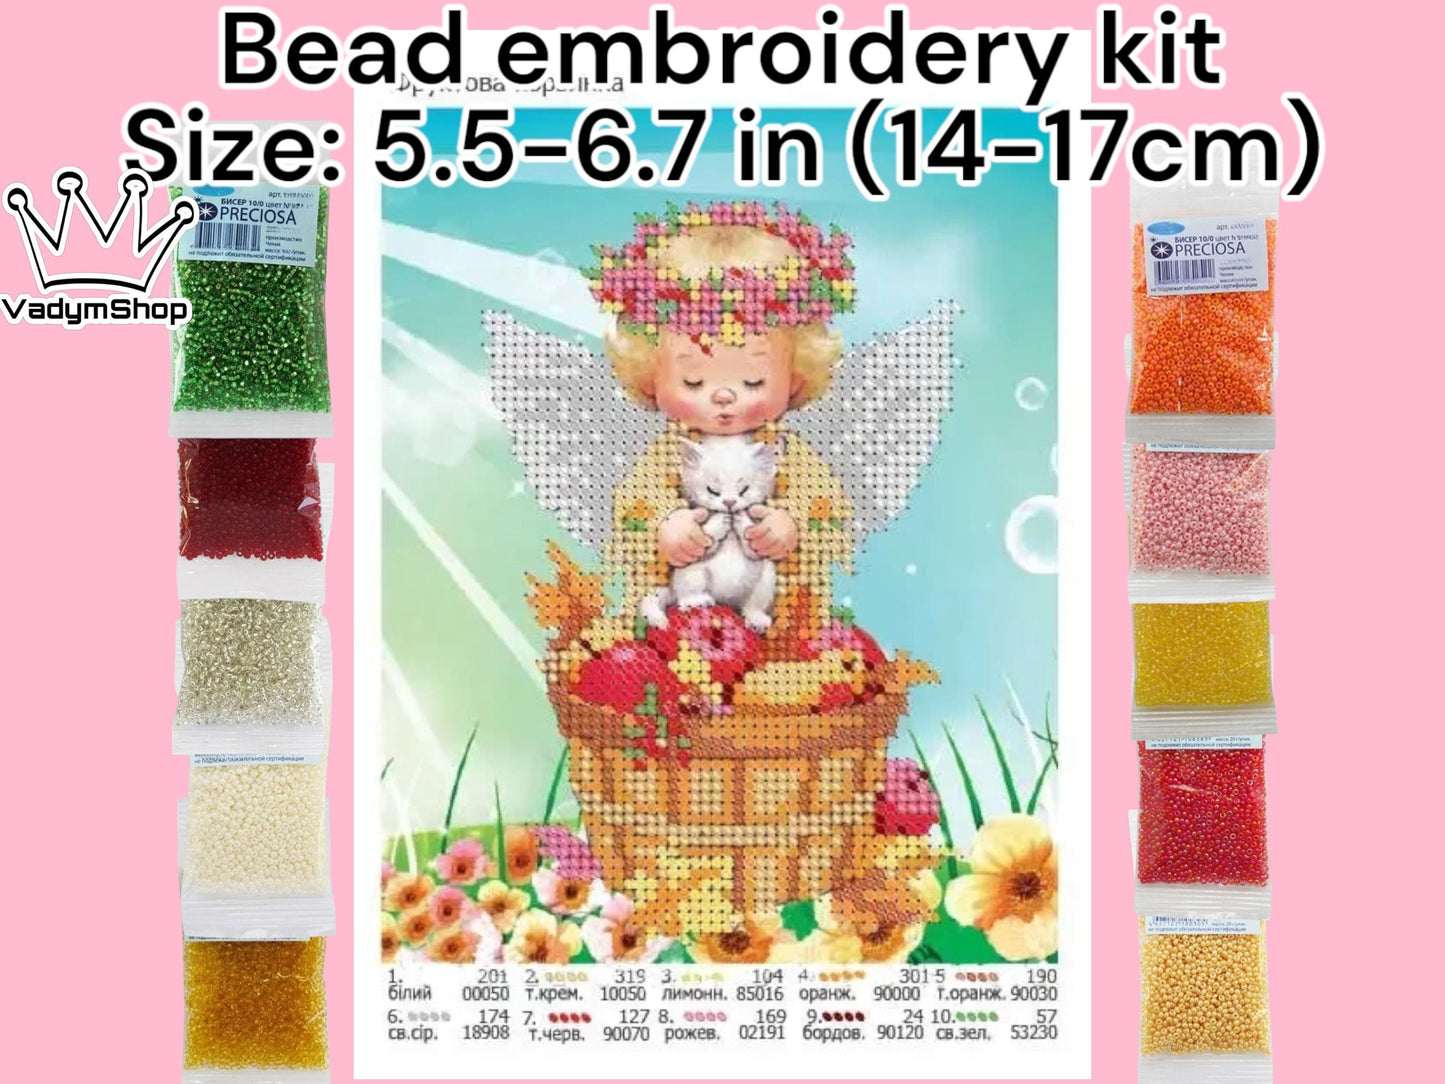 Small Bead embroidery kit "Angel with fruits". Size: 5.5-6.7 in (14-17cm) - VadymShop